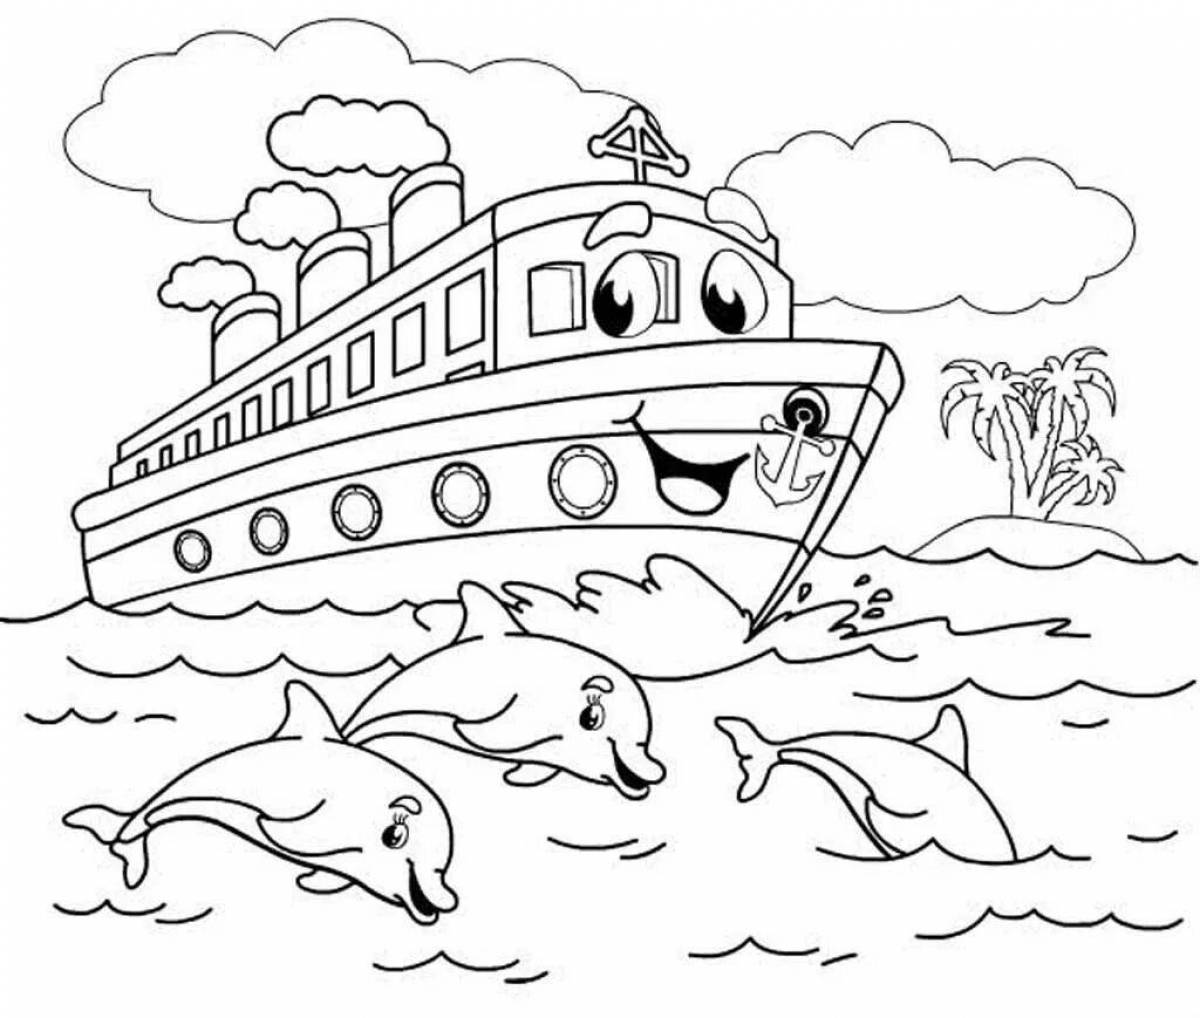 Coloring page funny steamer for children 5-6 years old